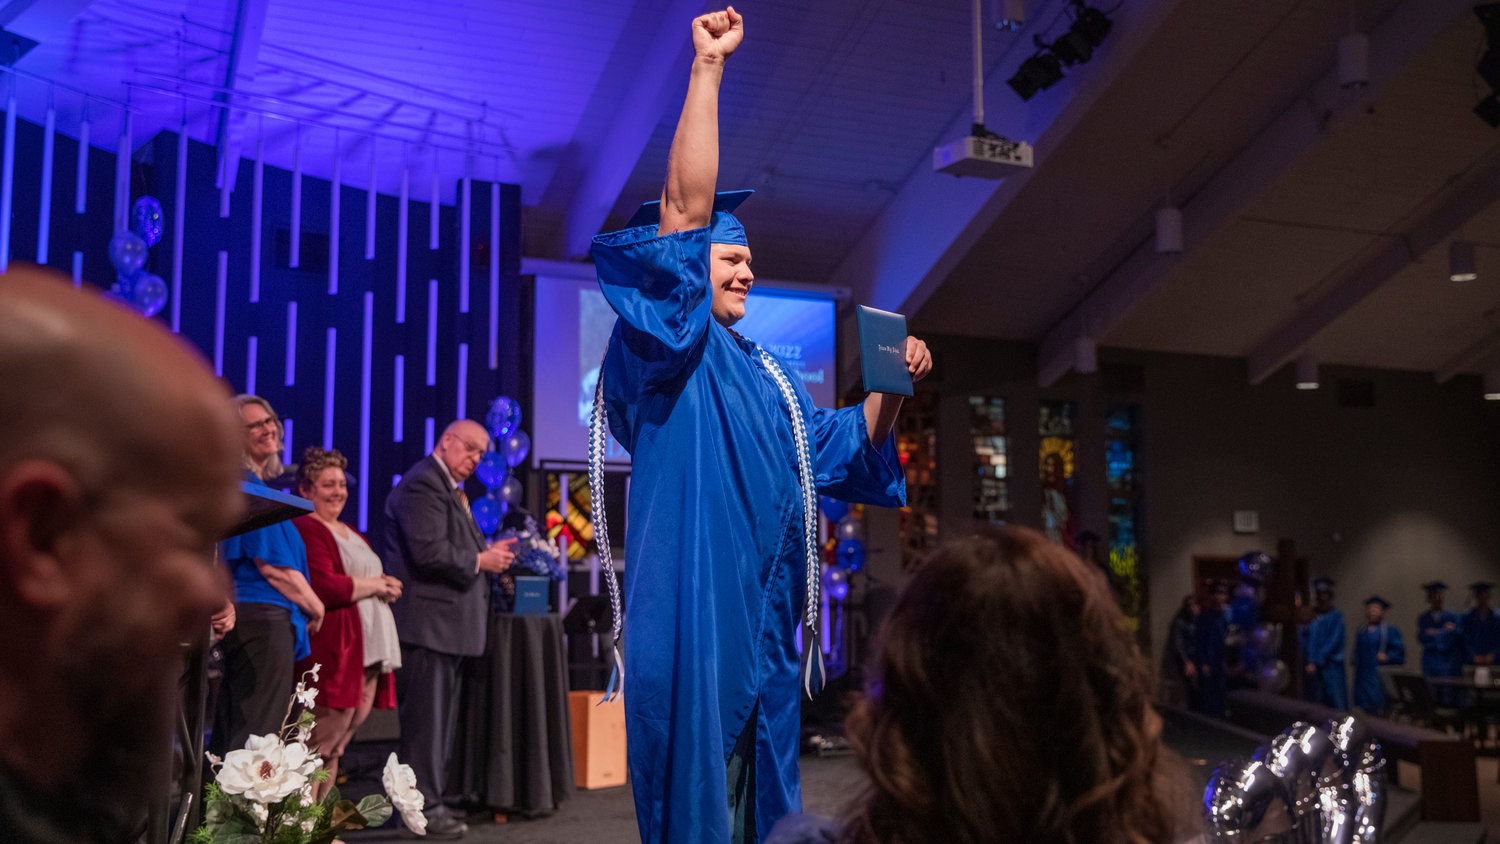 Daniel Lopez smiles and holds up his diploma to celebrate graduating from Futurus High School in Centralia on Tuesday.